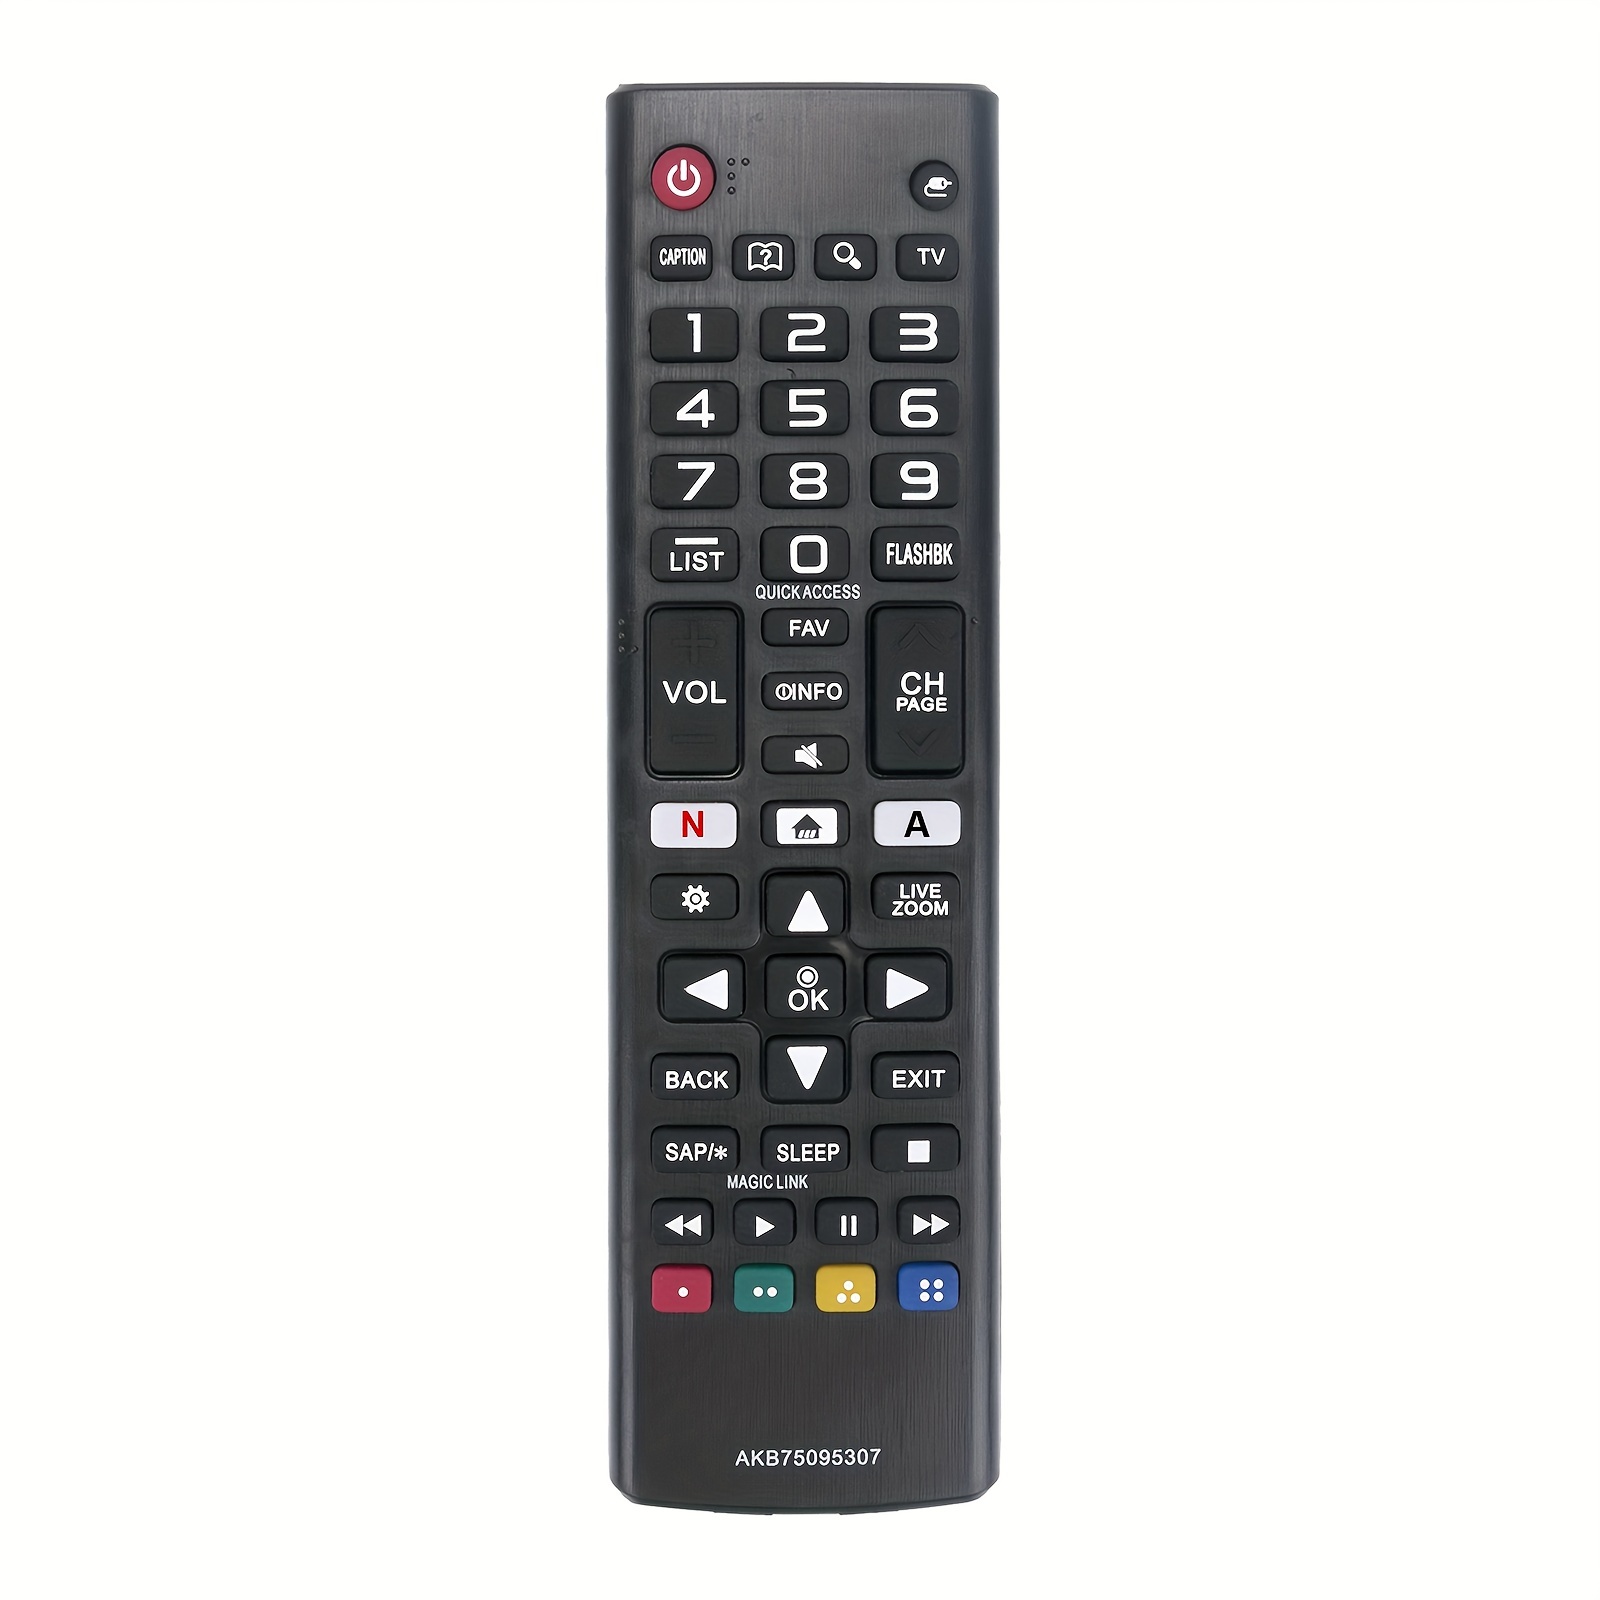 

Universal Tv Remote Control Replacement, Model Akb75095307, Compatible With Select Tvs Including 49uj6500, 55lj5500 - Slim Design, 1.97in Wide, 7.09in High, With Gp Alkaline Batteries Included